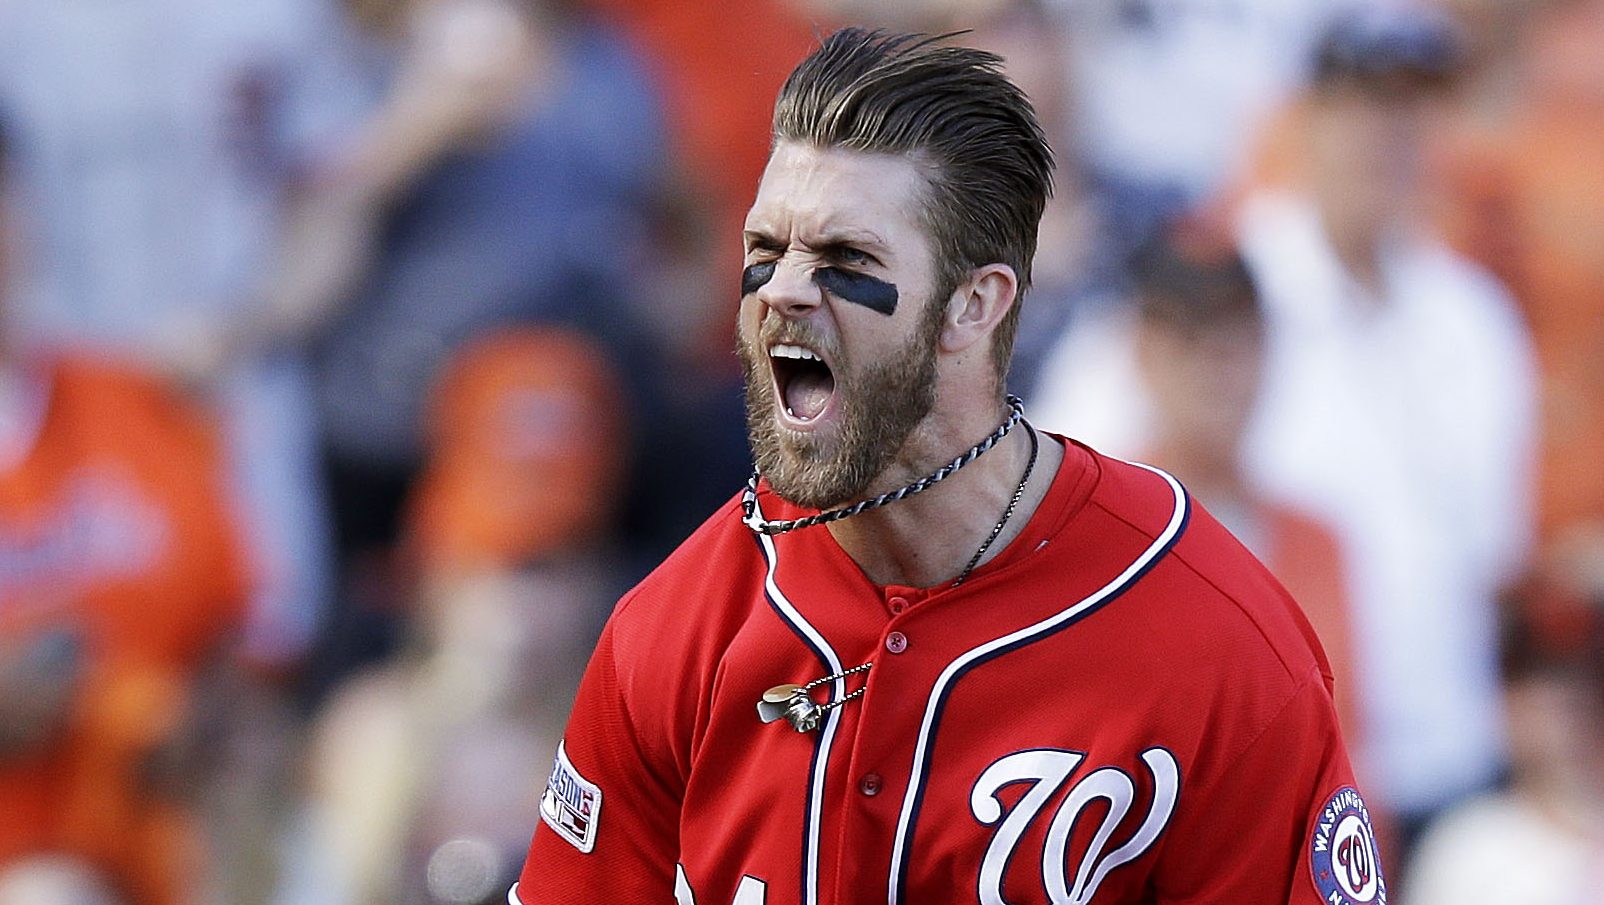 7 incredible facts about Bryce Harper's NL MVP season